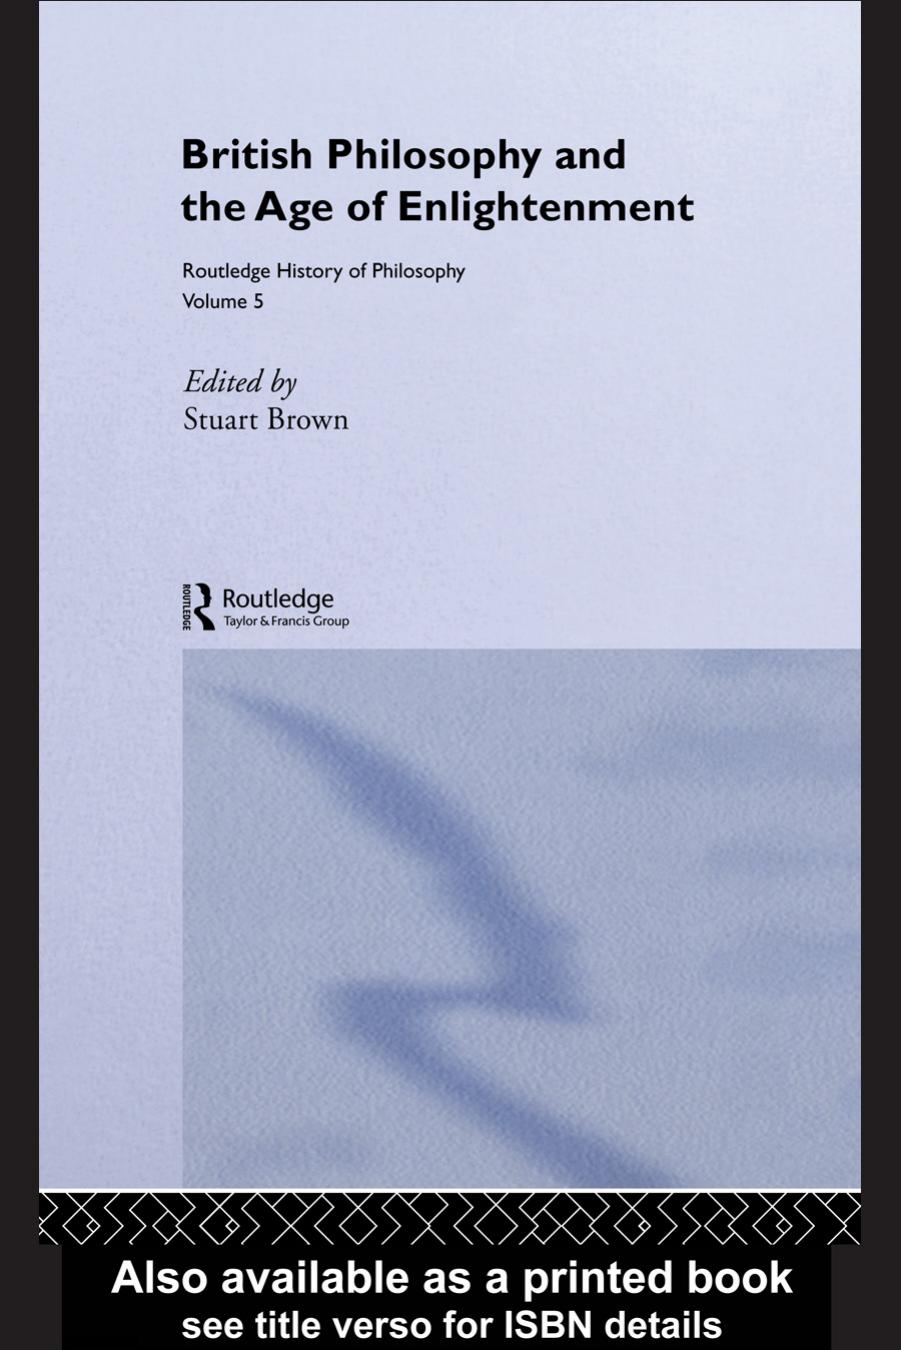 Routledge History of Philosophy Volume V: British Empiricism and the Enlightenment